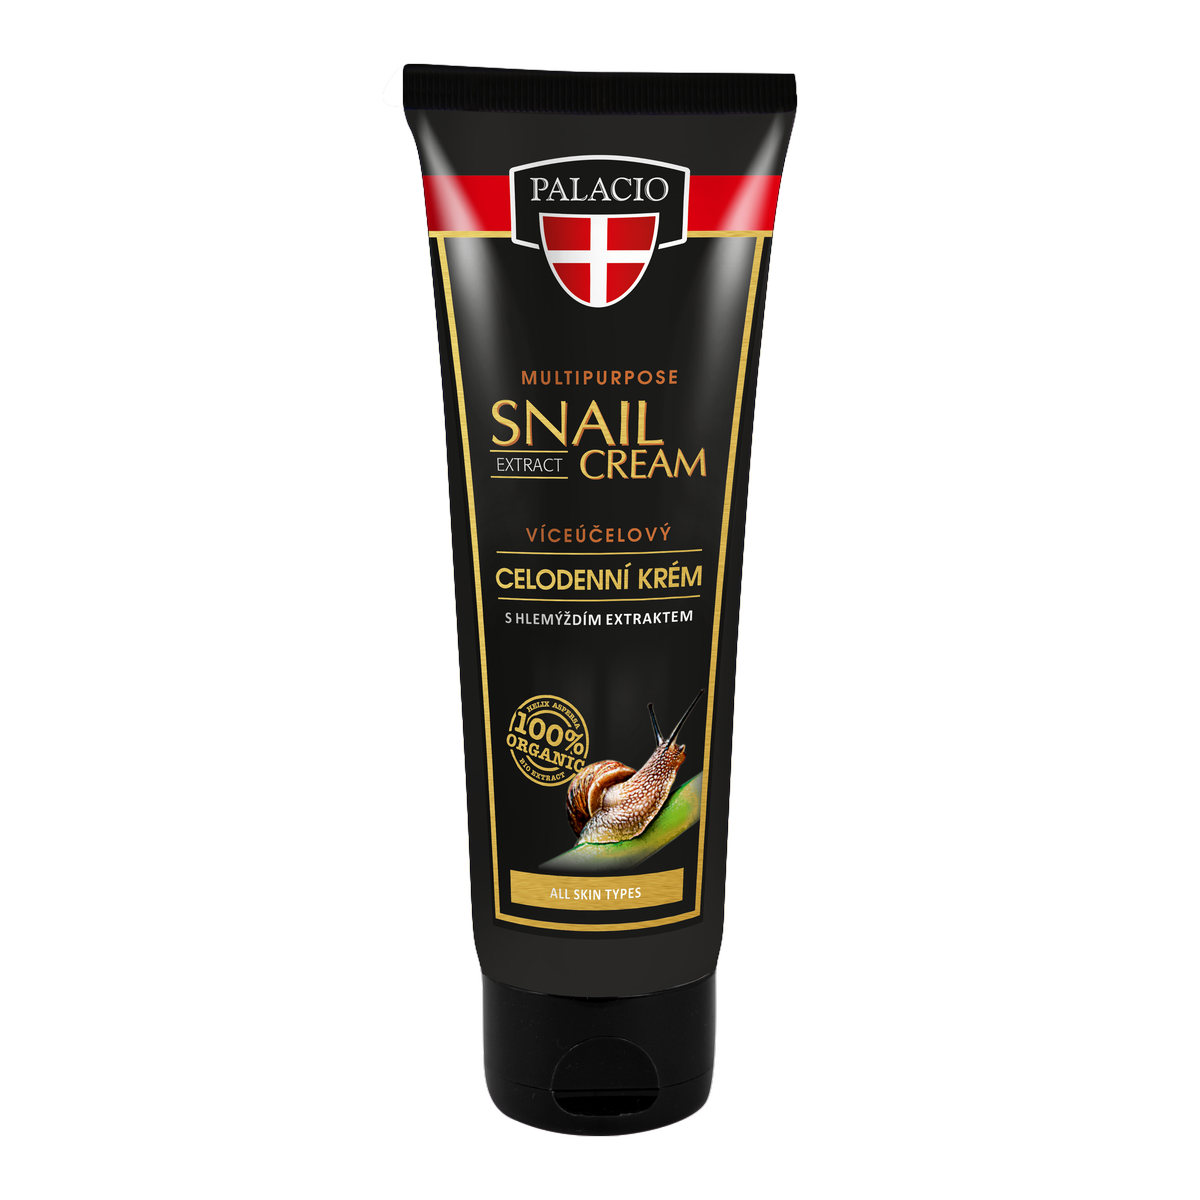 SNAIL EXTRACT Multipurpouse Cream 125ml P1305 ENG WEB 54